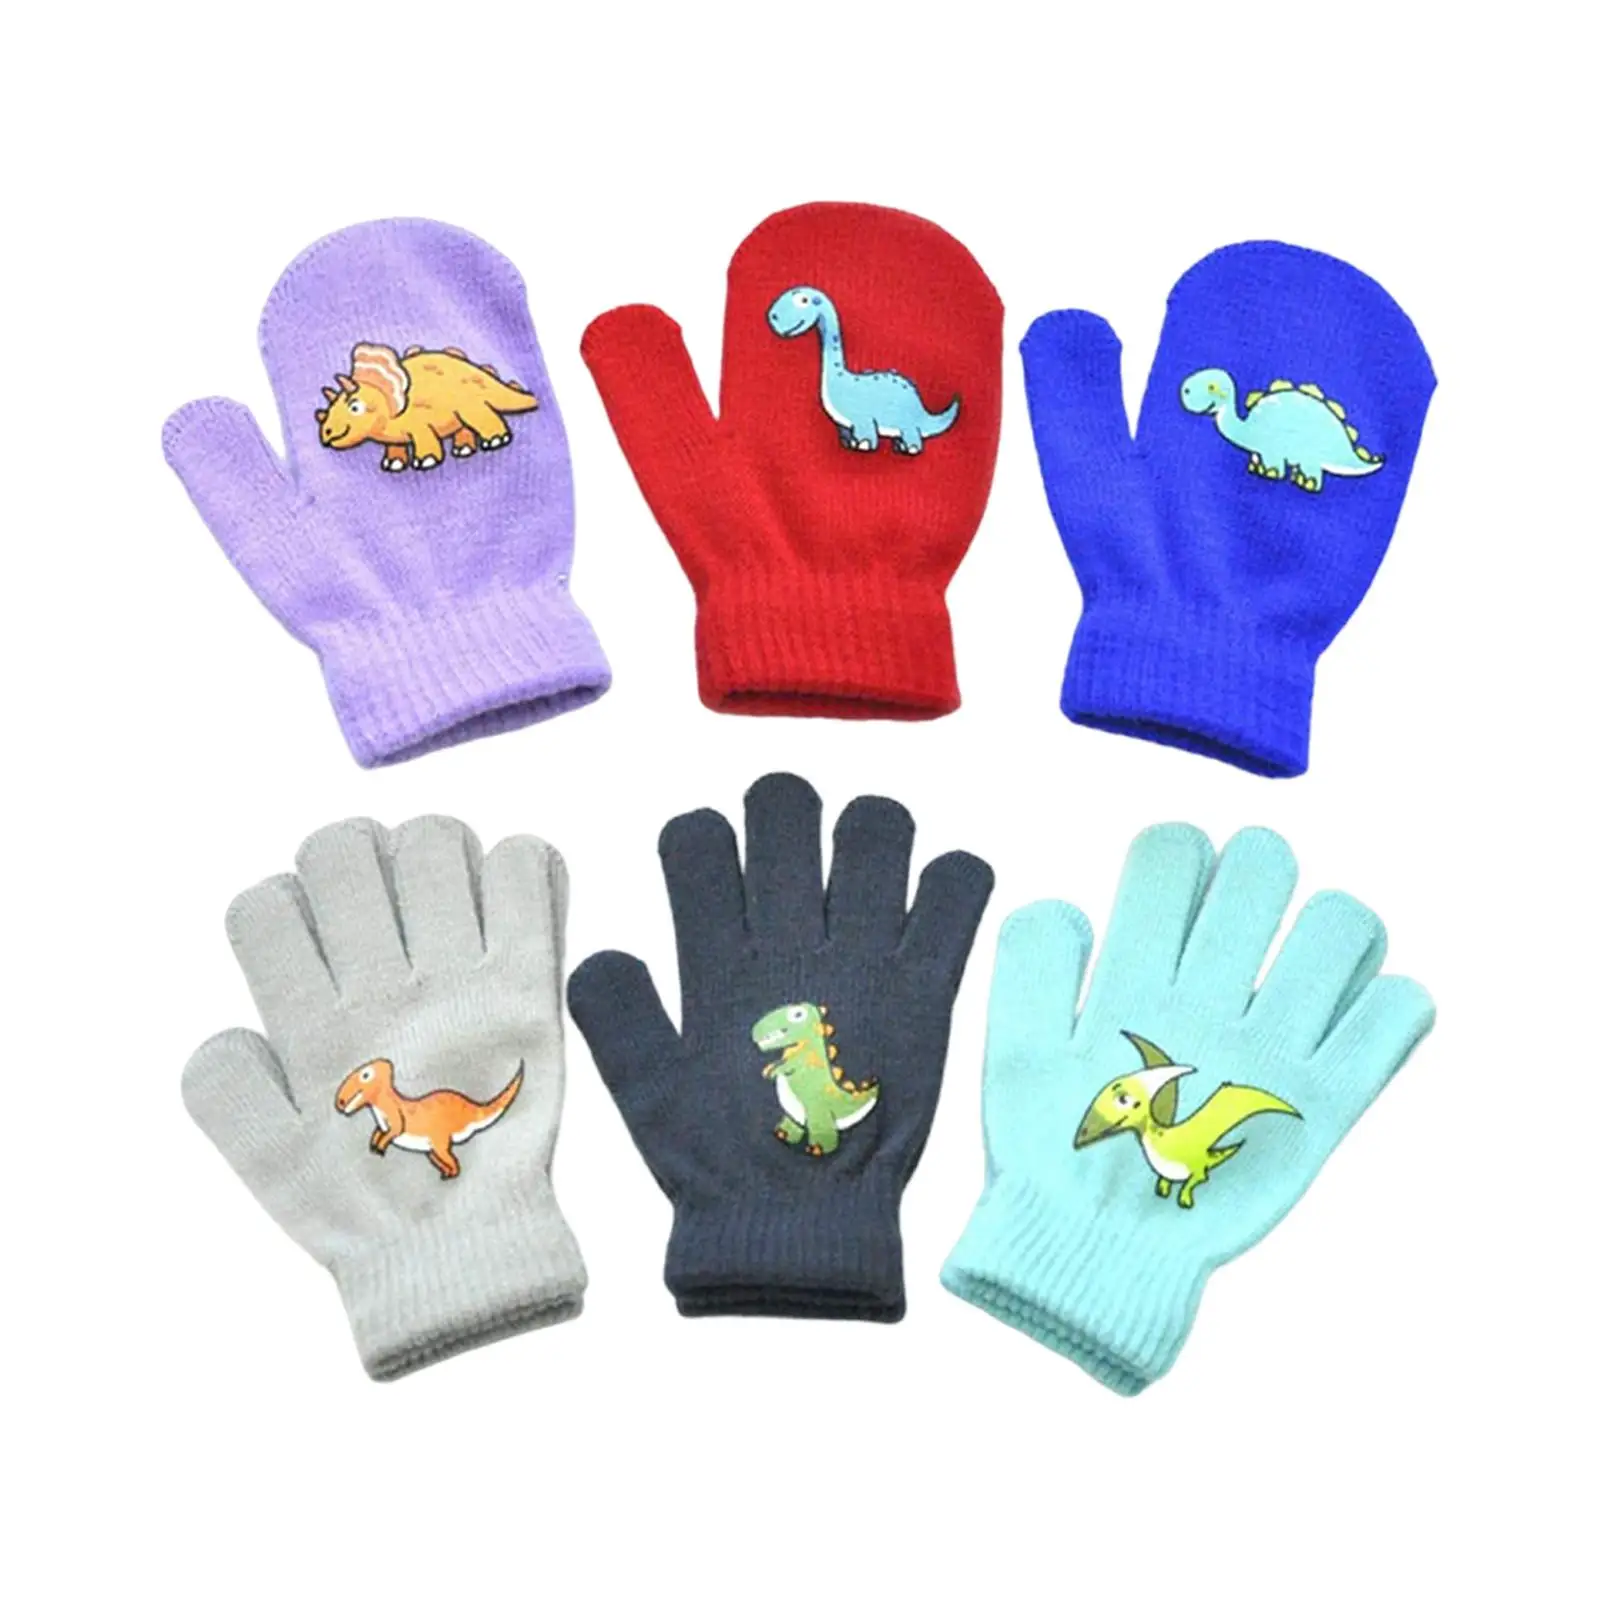 12Pcs Stretchy Kids Gloves Winter Daily wearing Outdoor Sports for 1-13 Years Old Girls Boys Cycling Warm Knitted Gloves Mittens